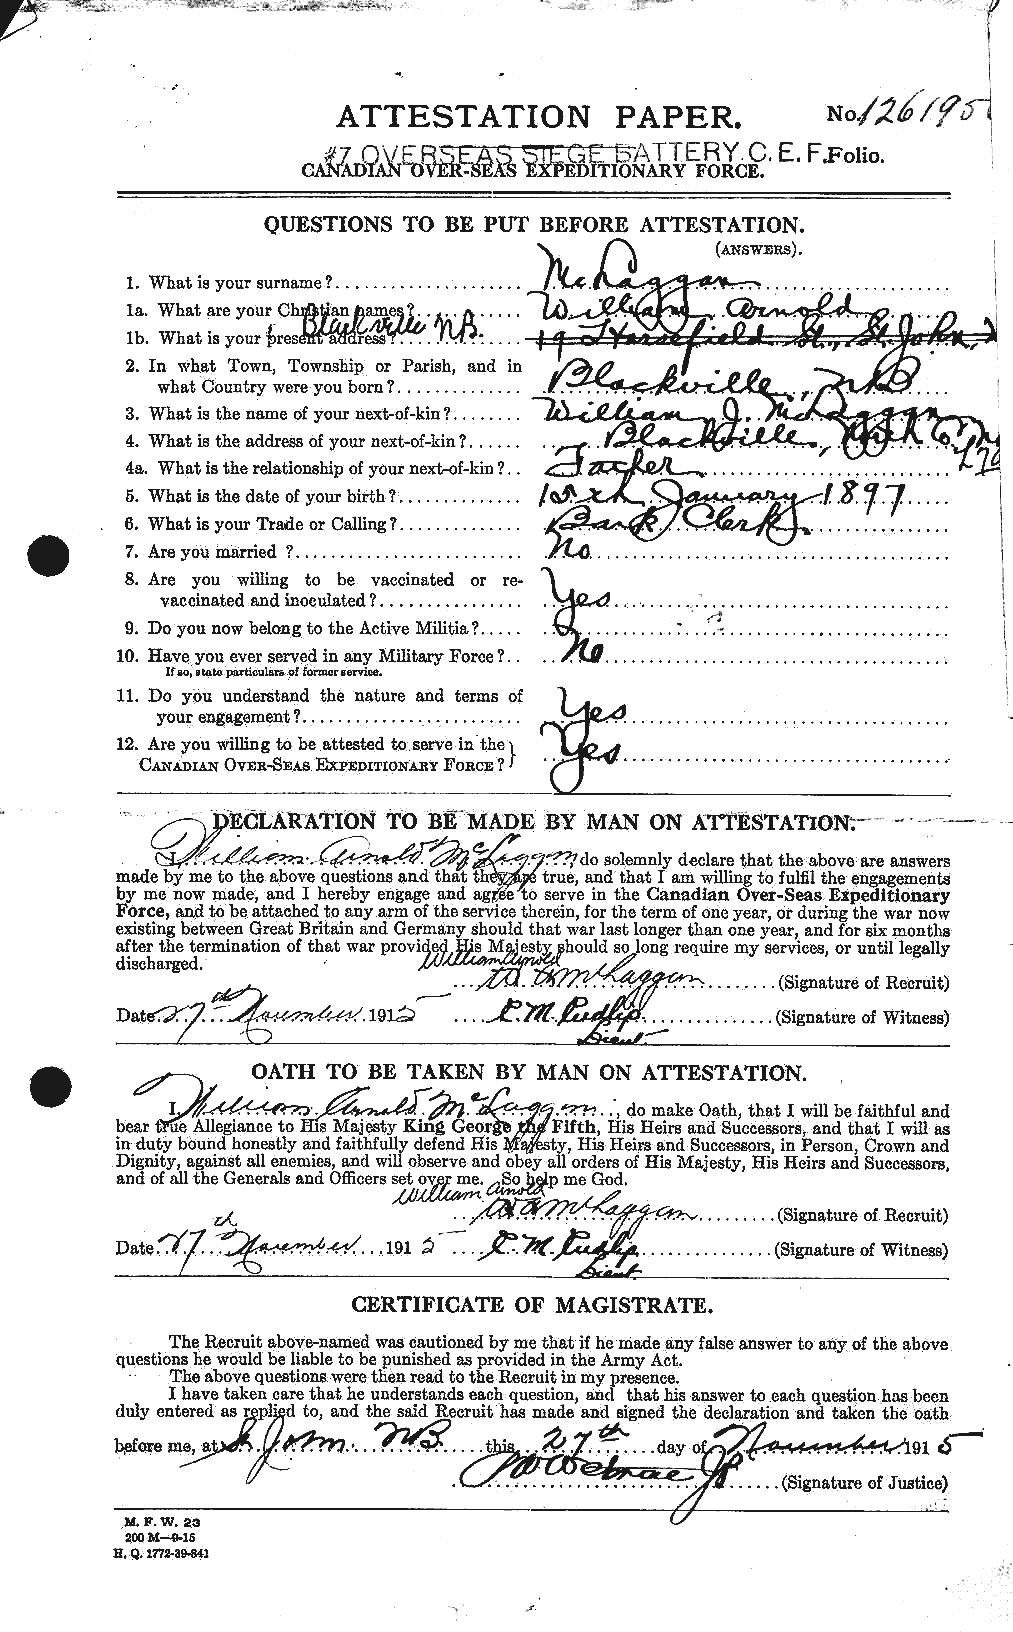 Personnel Records of the First World War - CEF 533988a